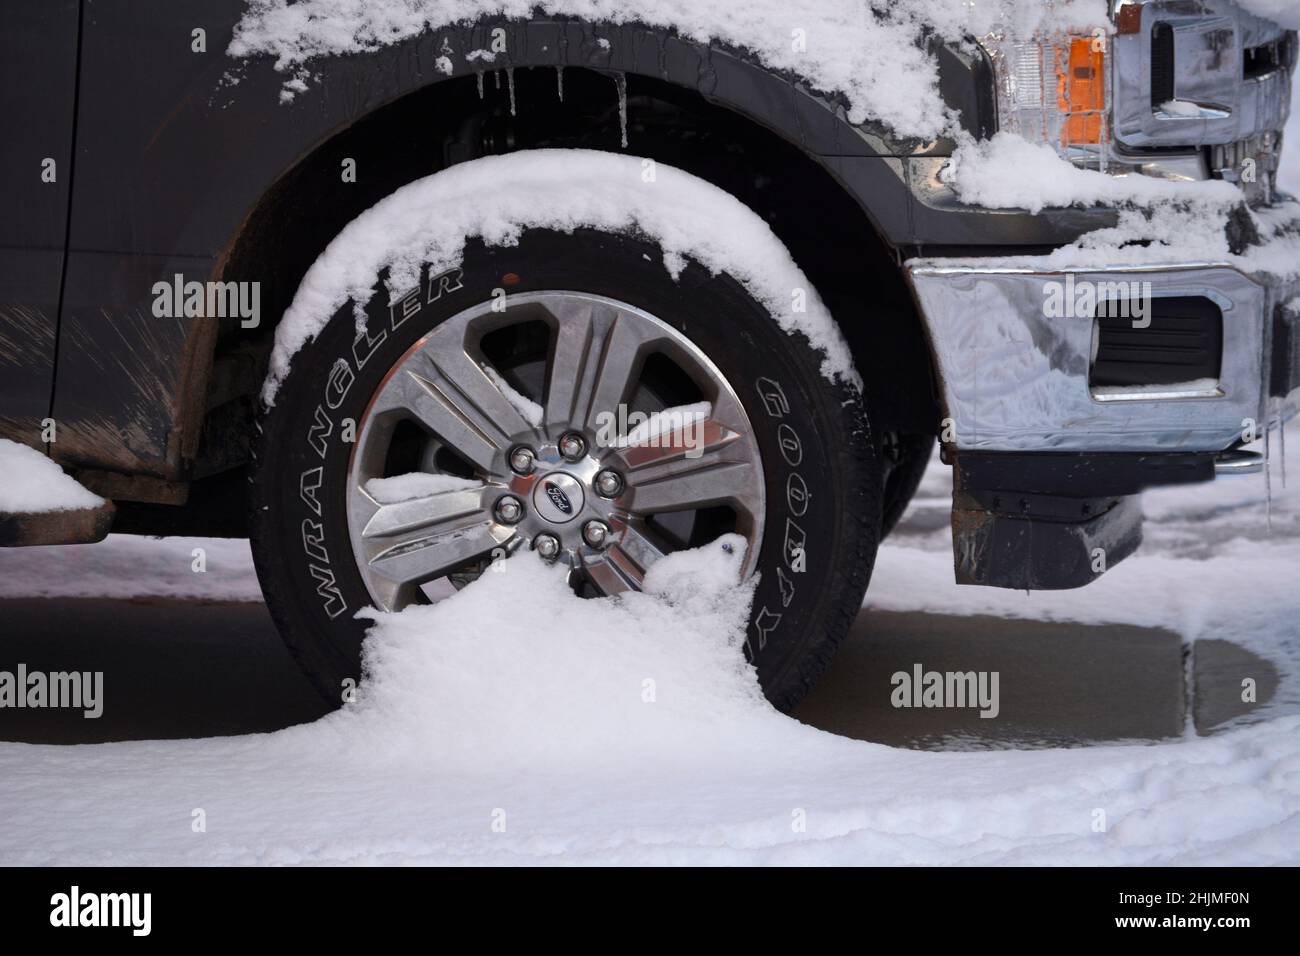 A Ford truck with Goodyear tires covered in snow in Santa Fe, New Mexico. Stock Photo